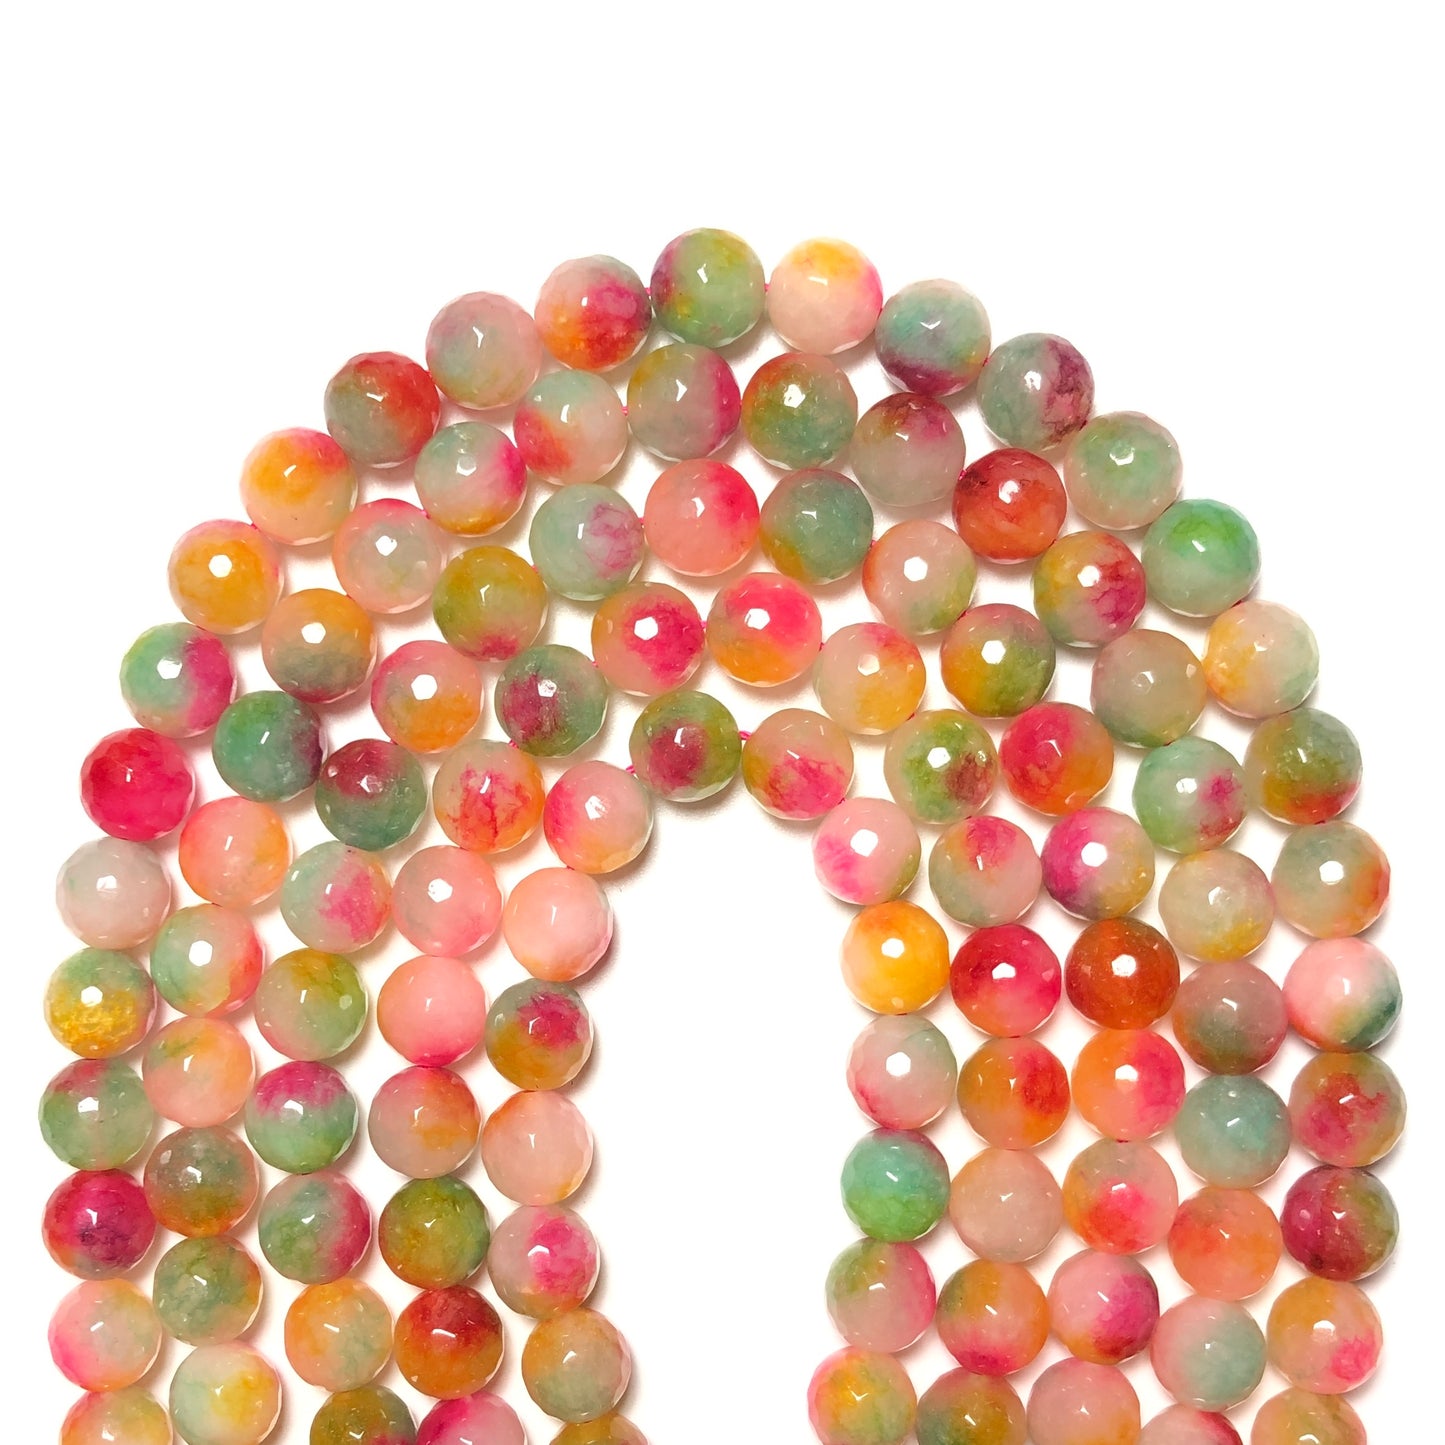 2 Strands/lot 10mm Pink Green Yellow Faceted Jade Stone Beads Stone Beads Faceted Jade Beads New Beads Arrivals Charms Beads Beyond